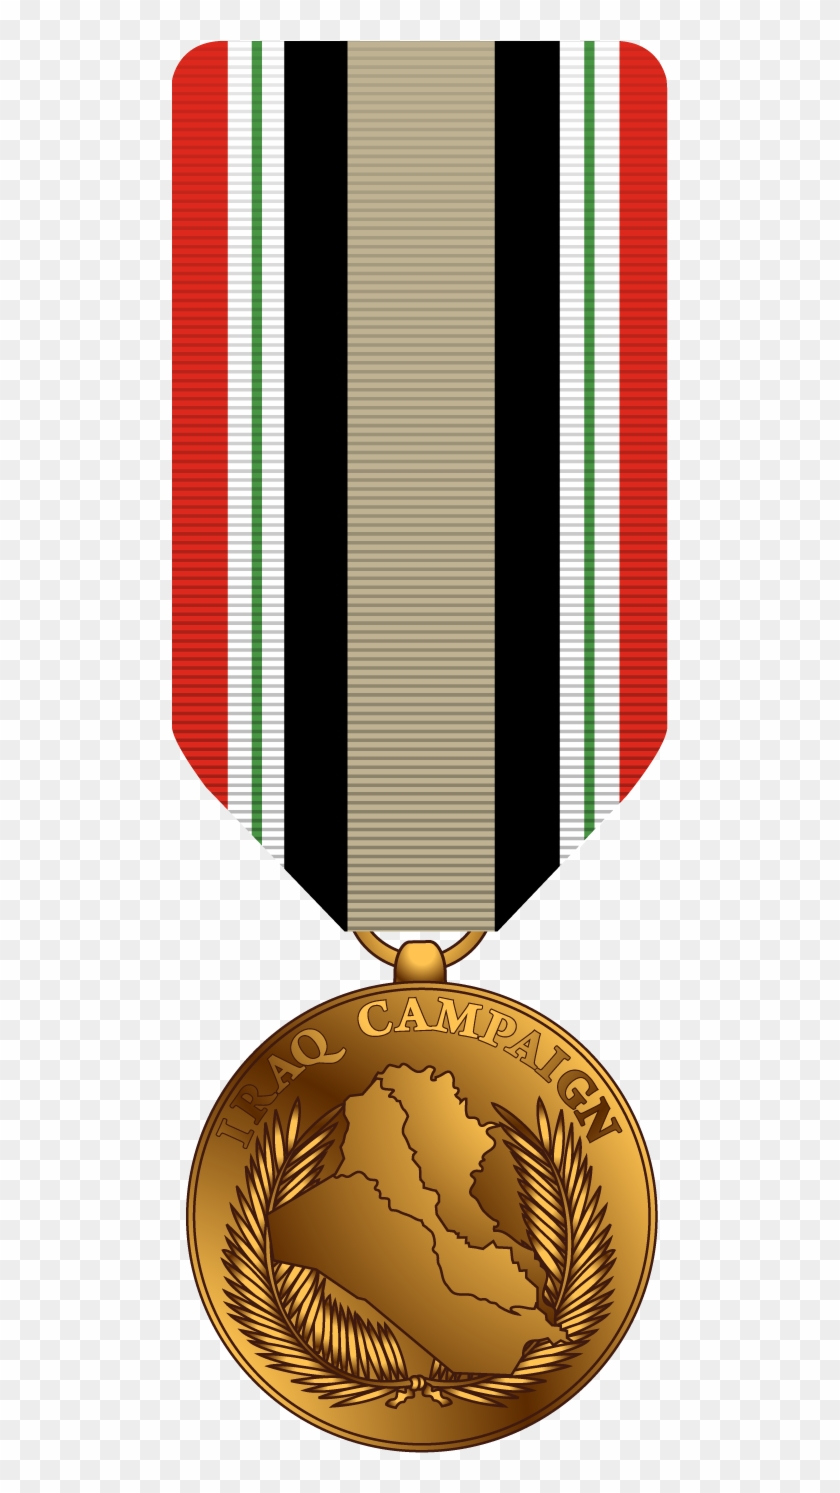 Iraq Campaign Military Medal - Gold Medal Clipart #3681057